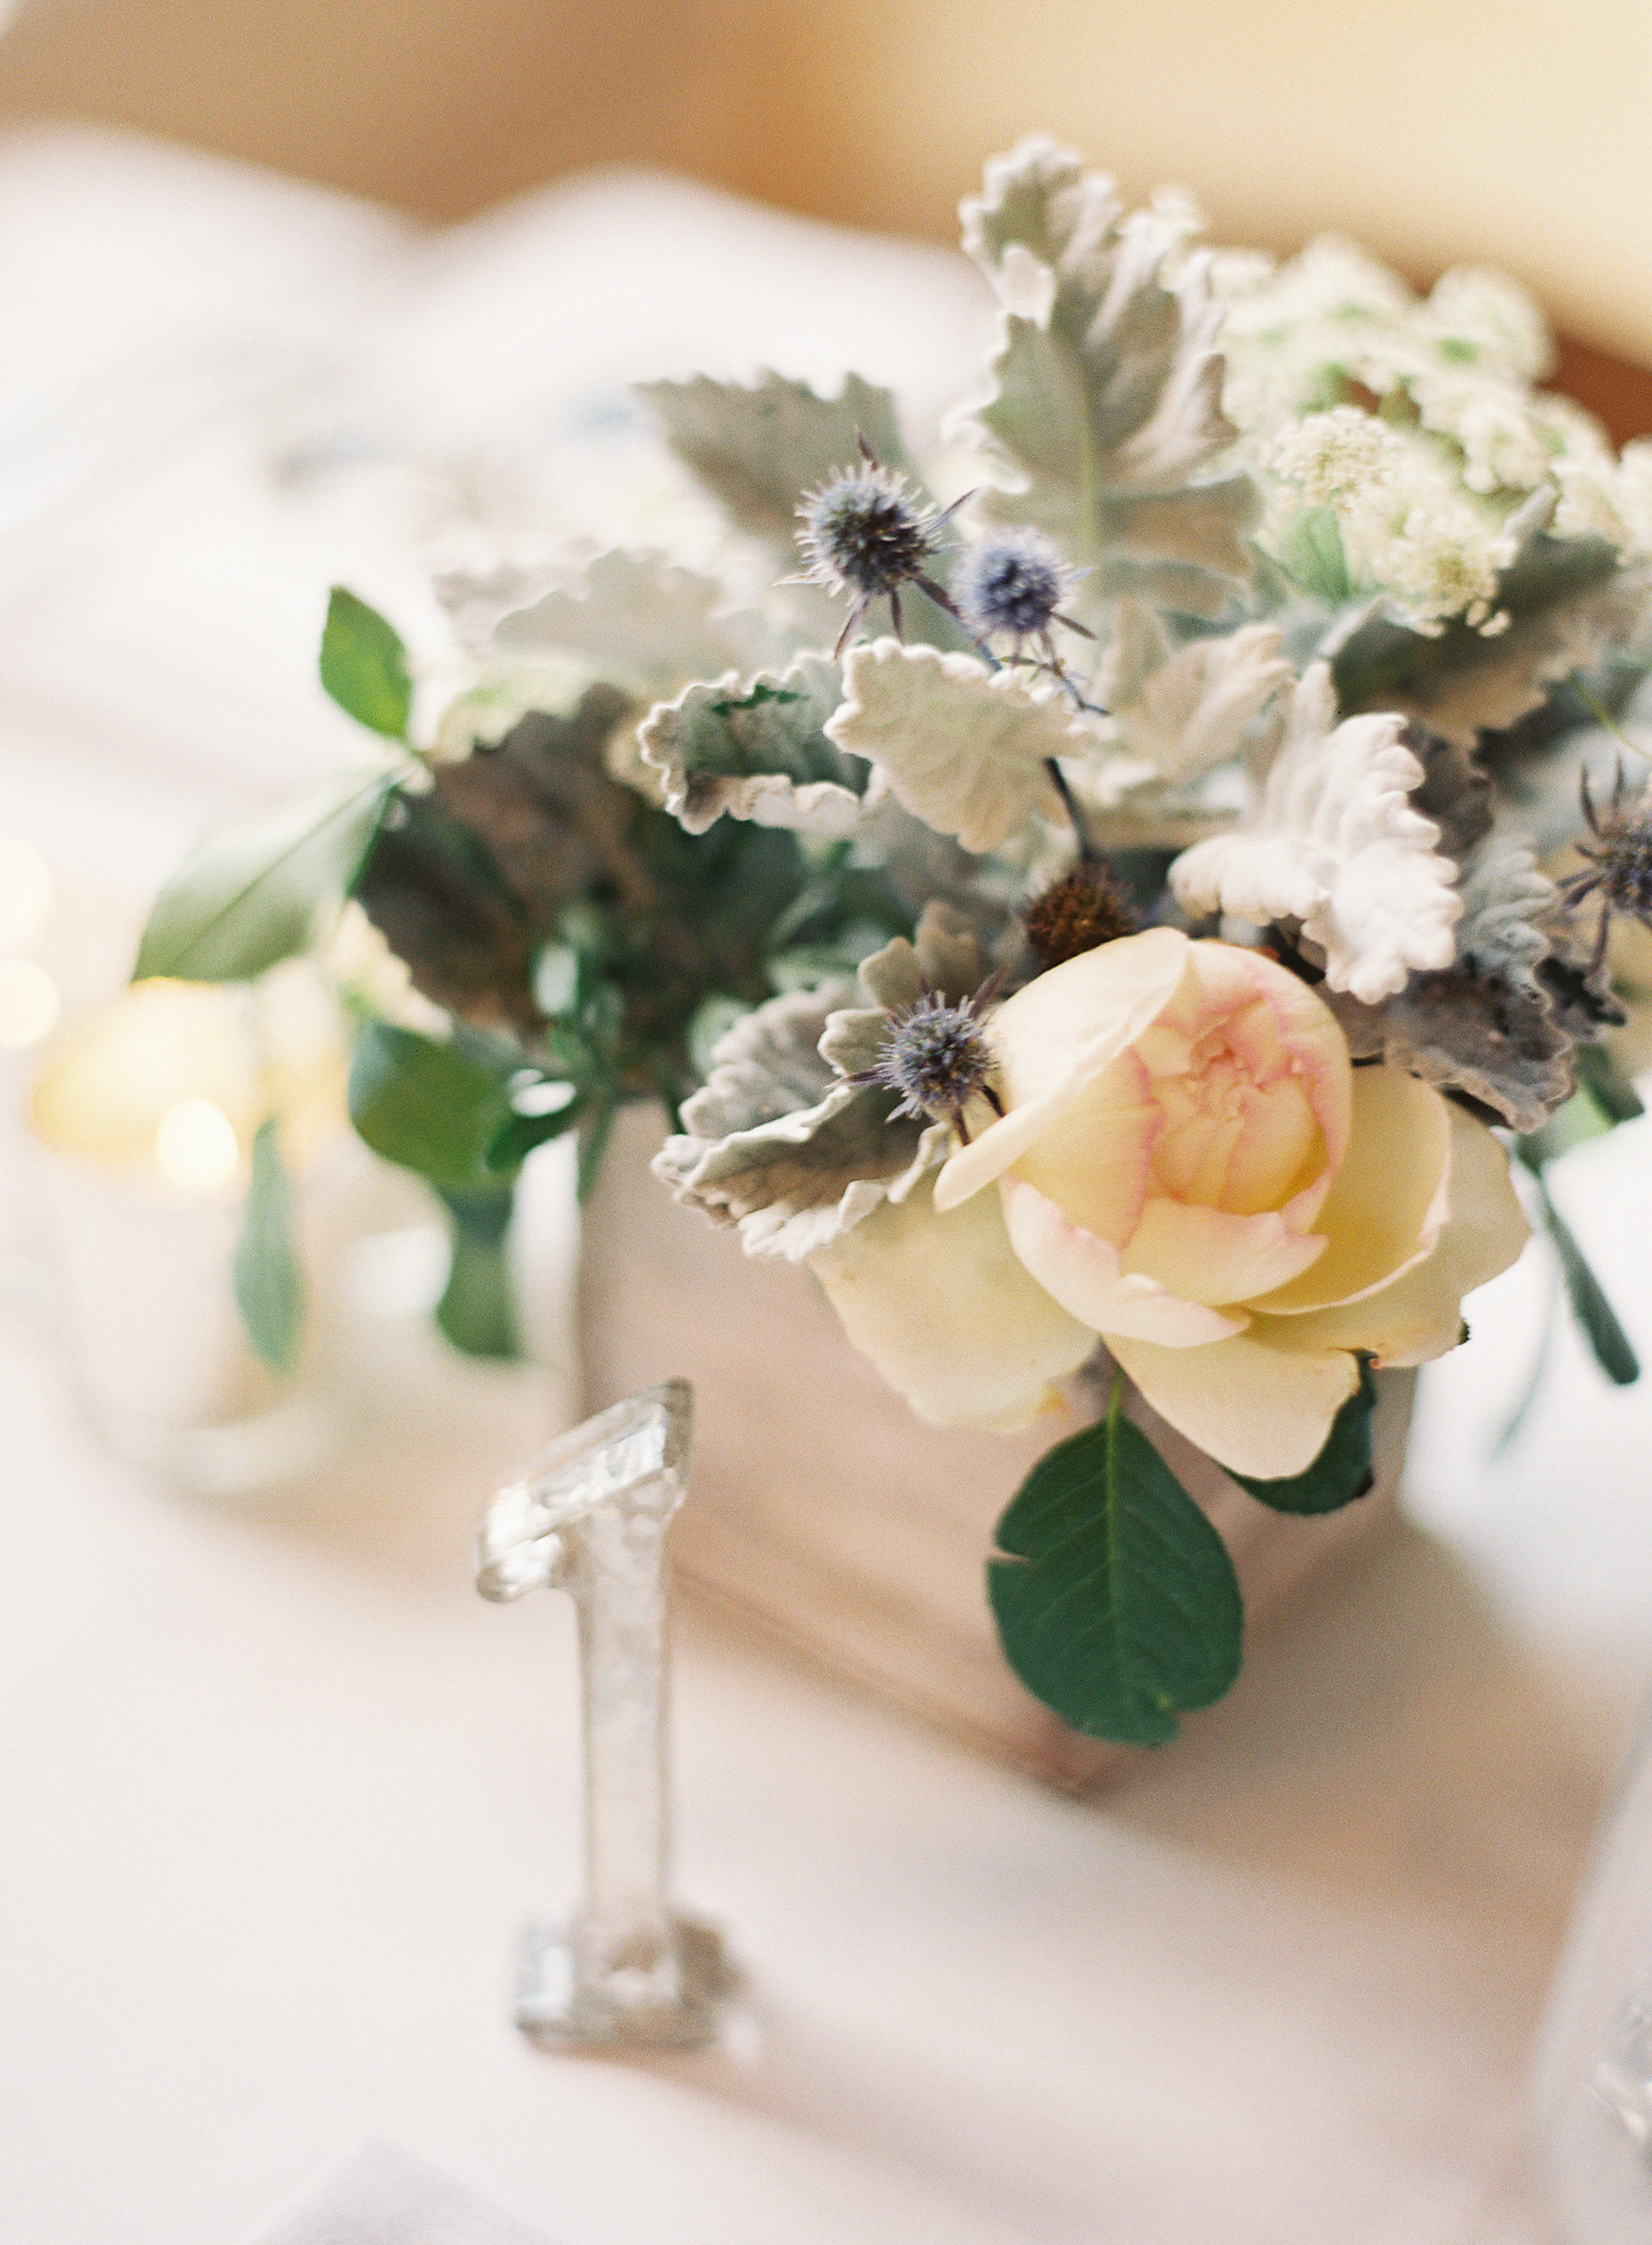 BHLDN Table Number | Wedding Planning Tips | The Day's Design | Clary Pfeiffer Photography